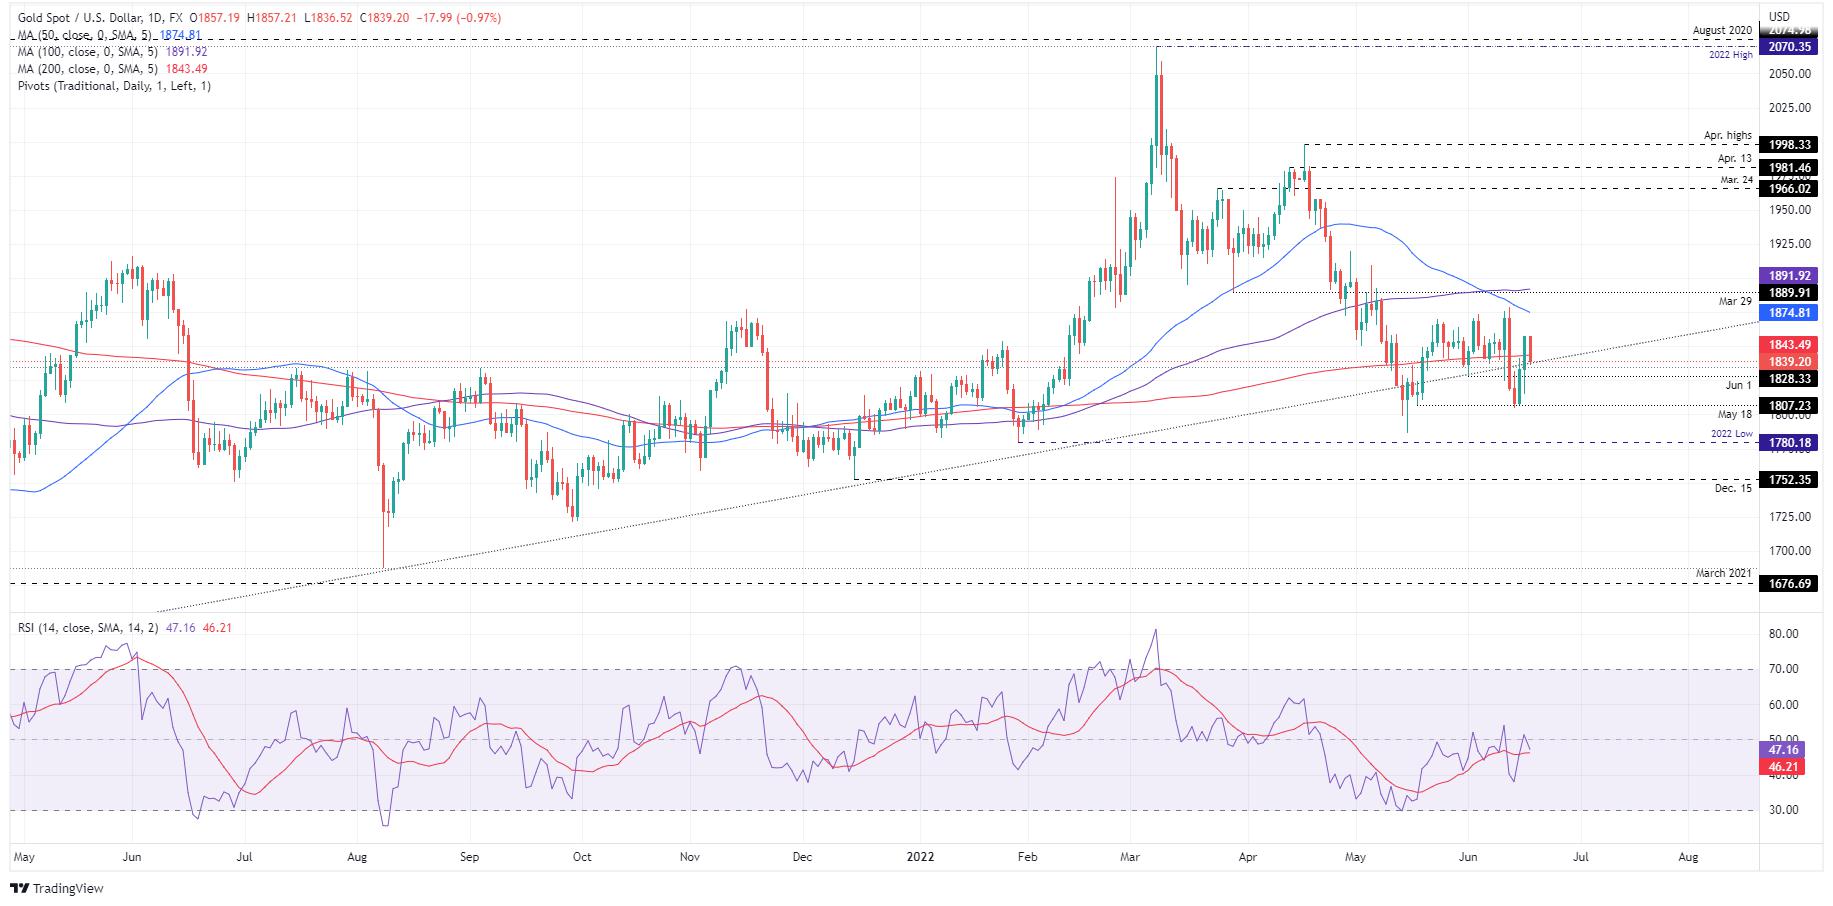 Gold Price Forecast: XAUUSD drops below the 200-DMA at around $1830s